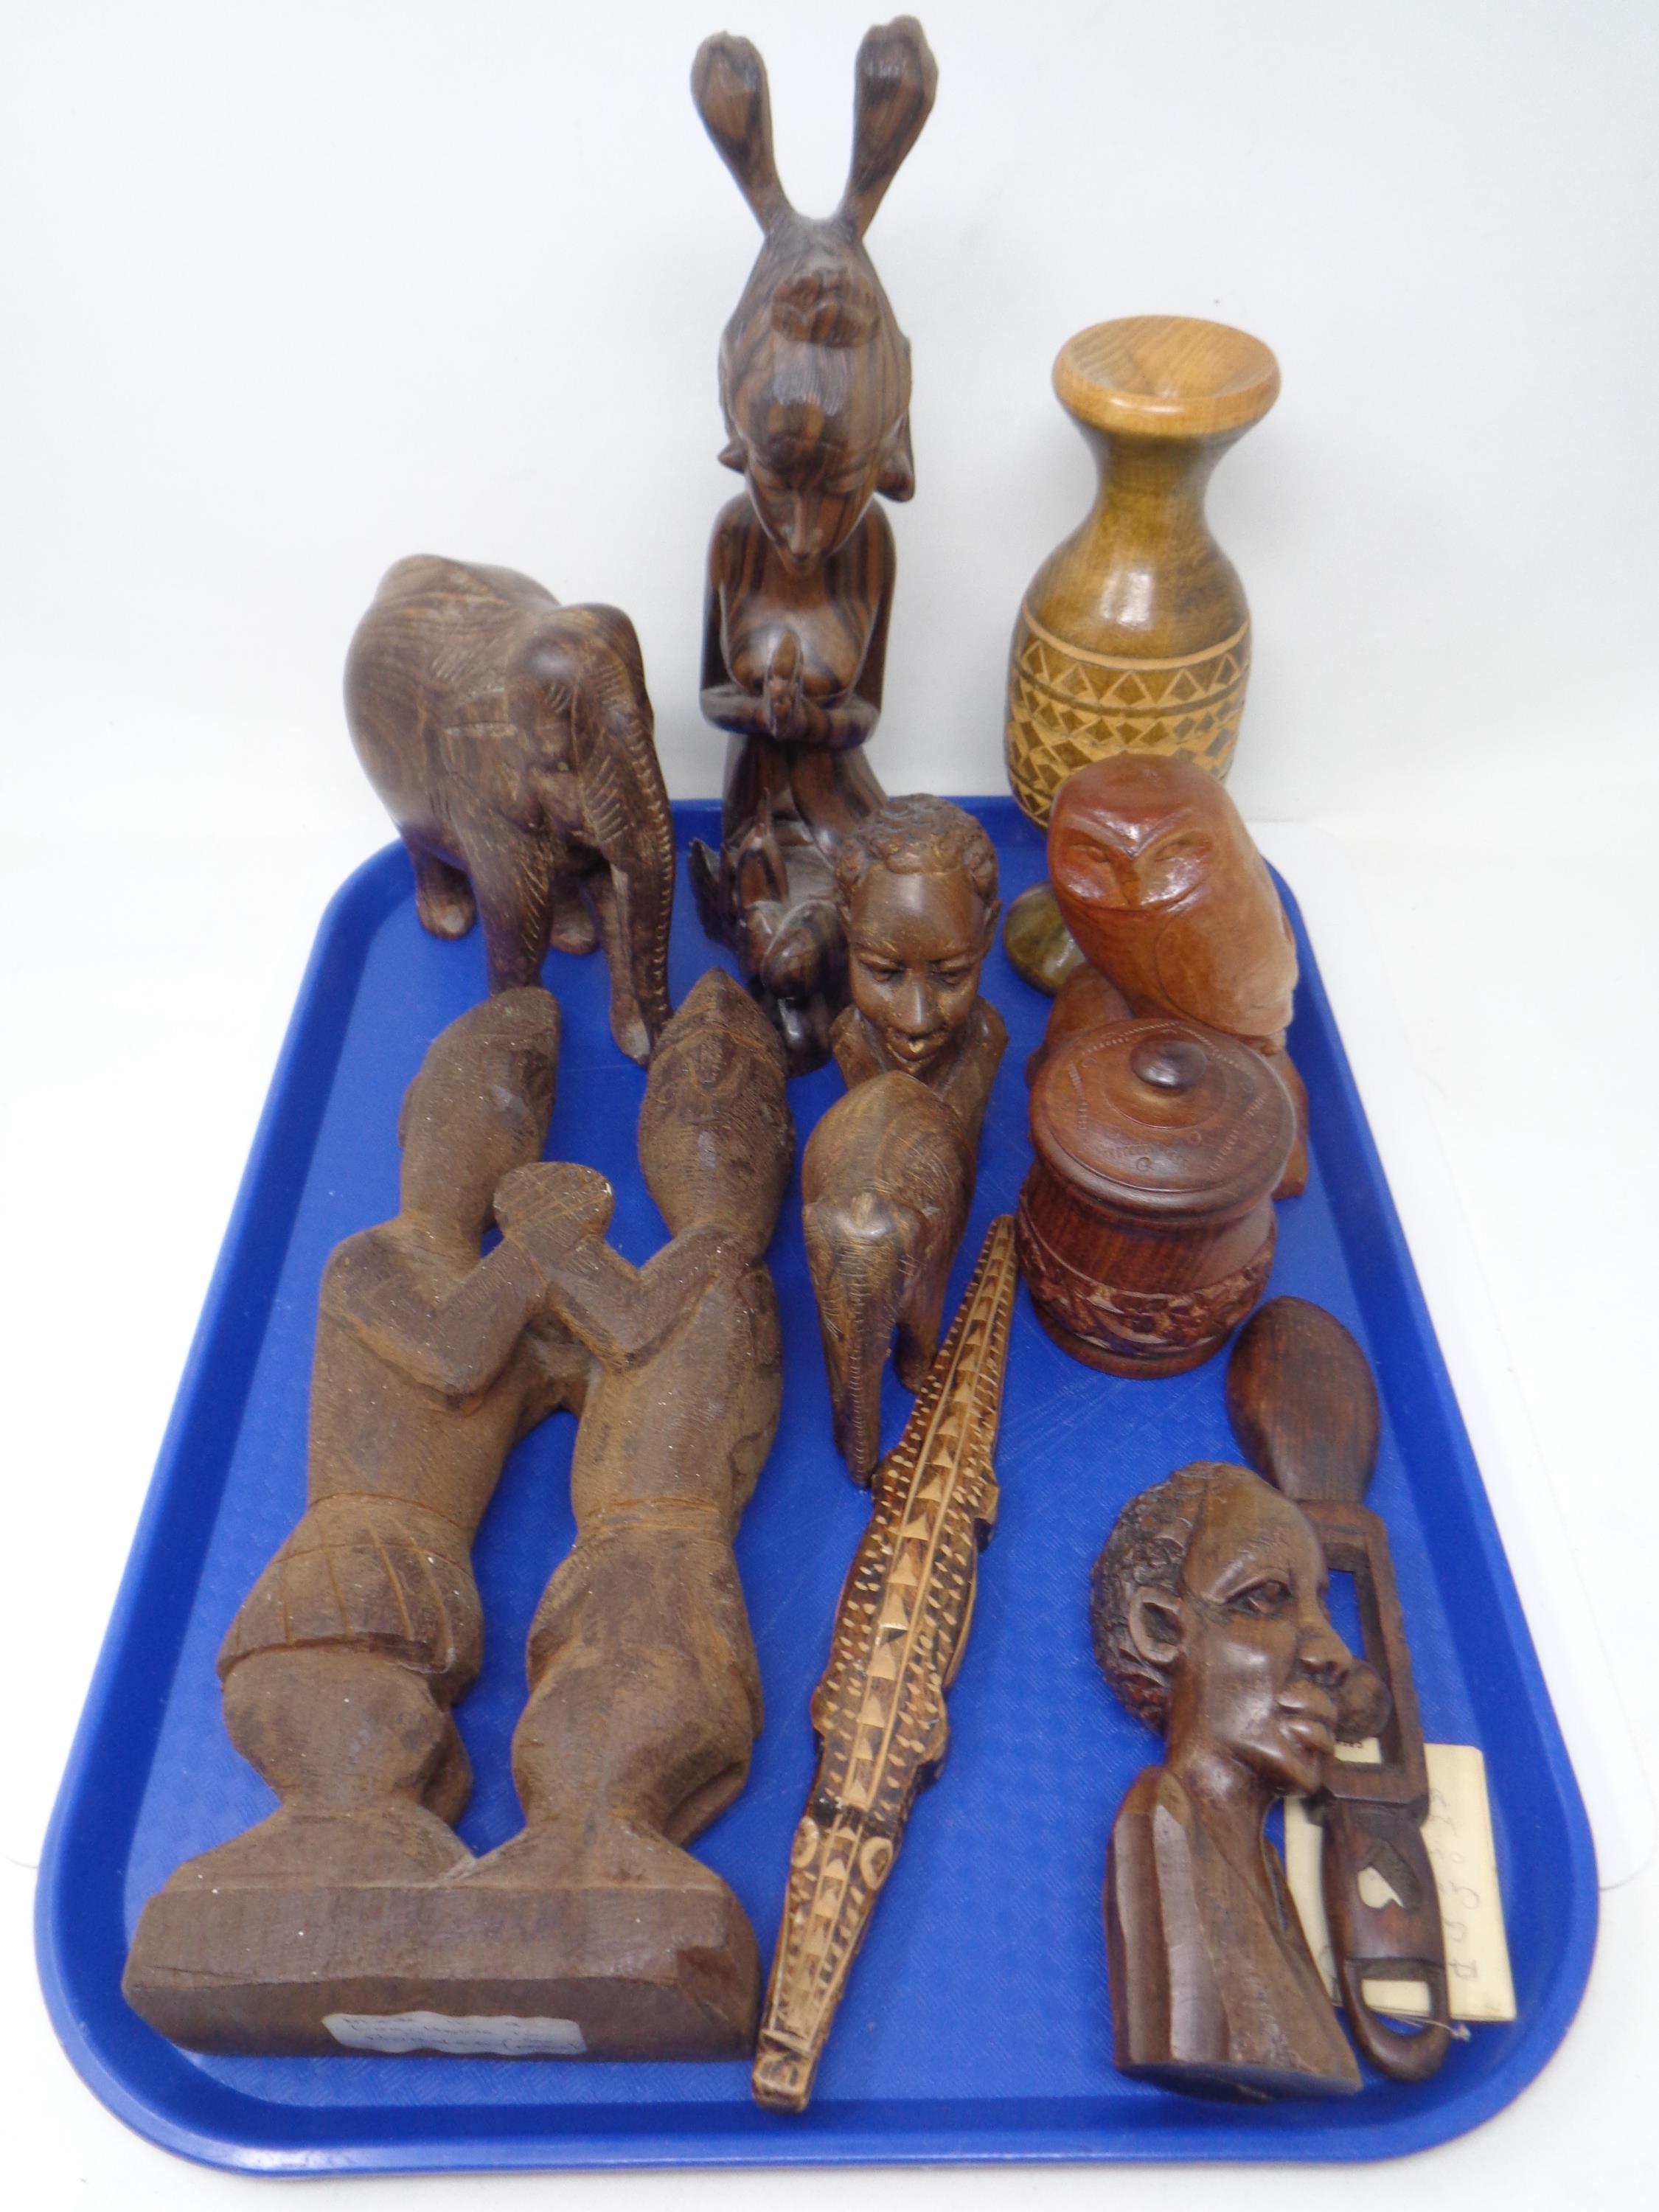 A tray containing tourist carvings.